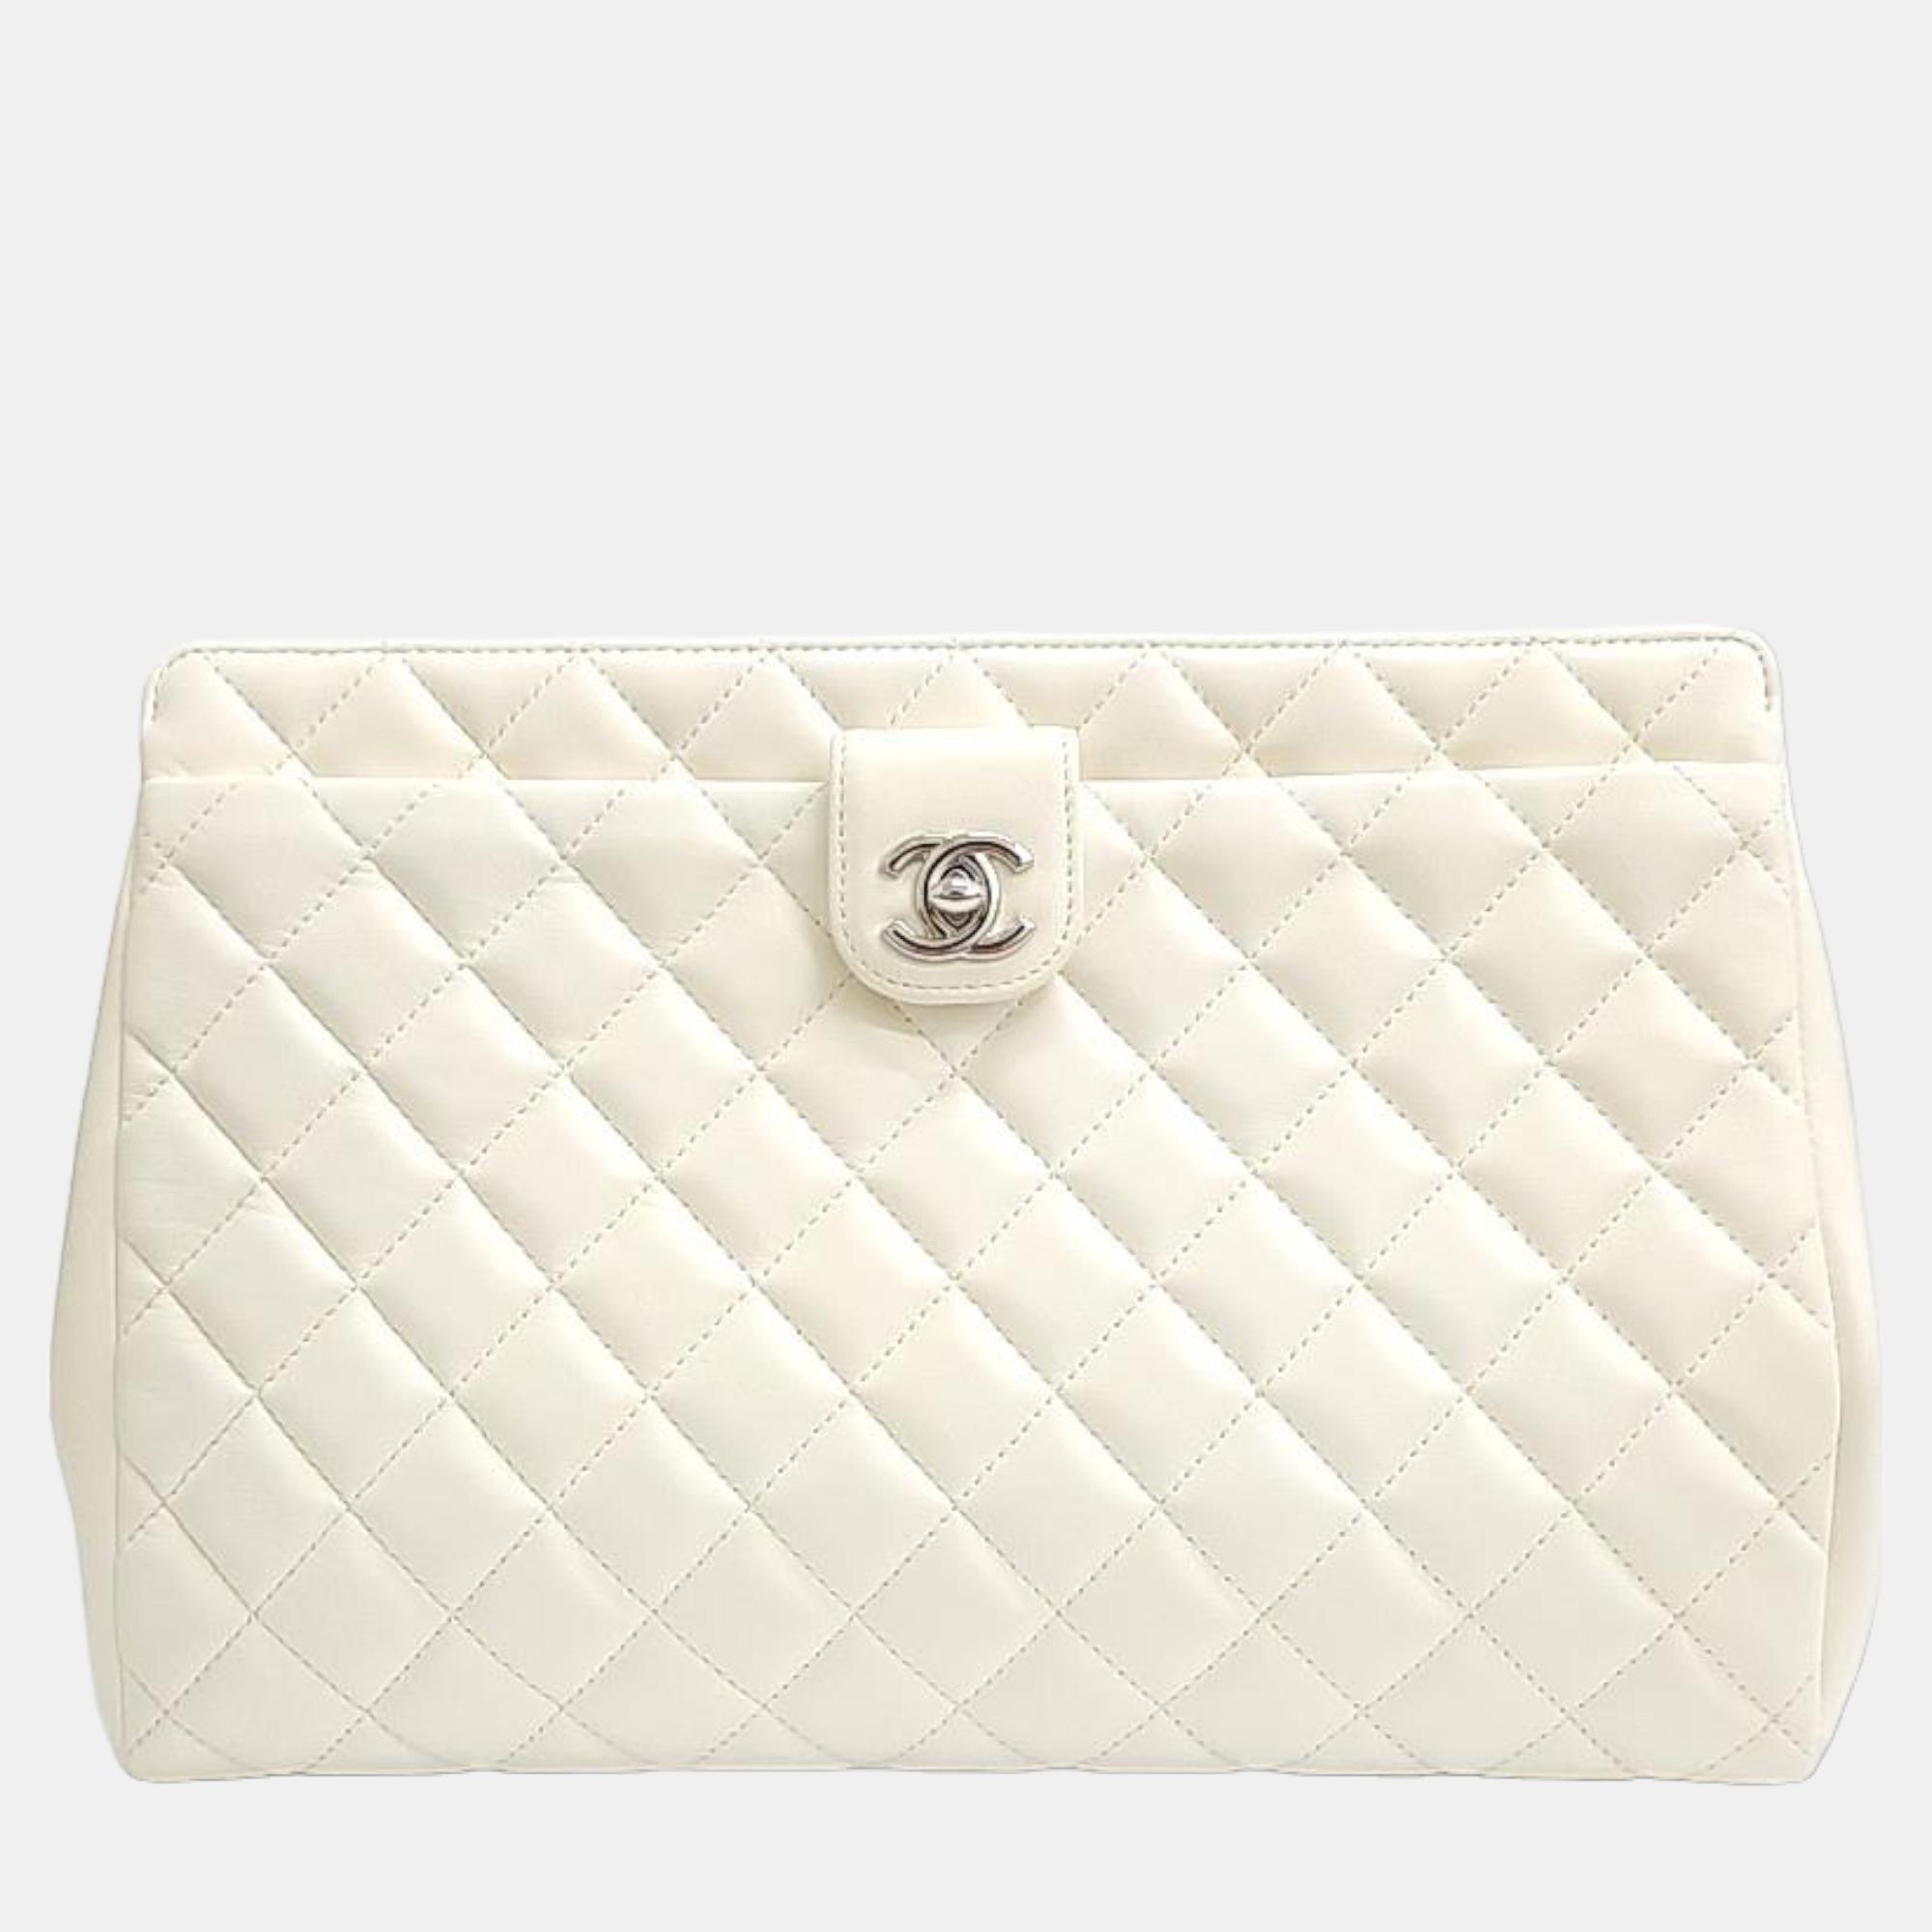 Pre-owned Chanel White Leather Cc Clutch Bag